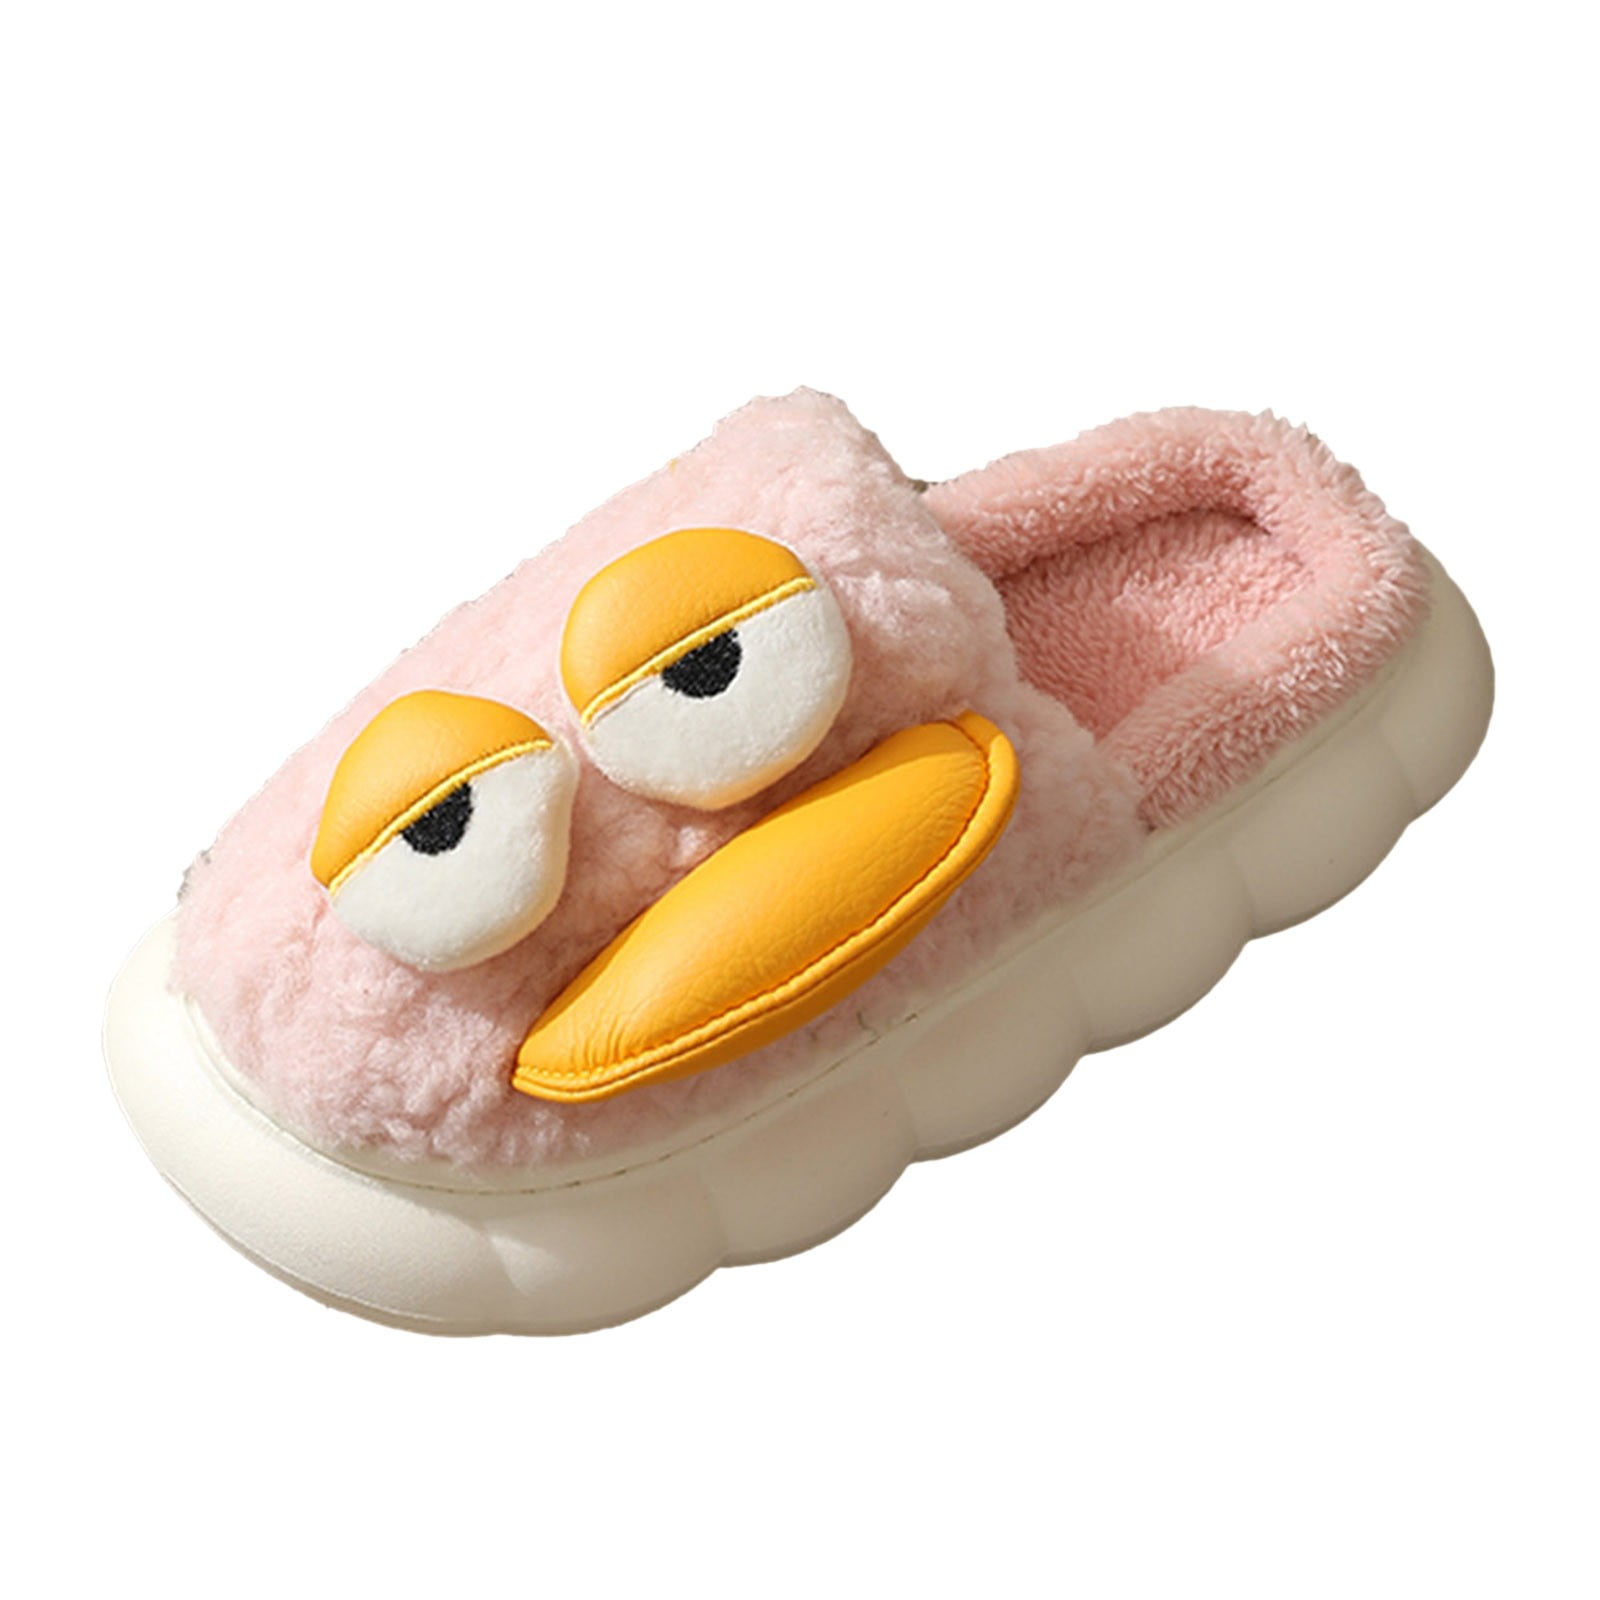 XINSHIDE Shoes Fashion Autumn And Winter Boys And Girls Children Slippers Flat Bottom Soft Plush Warm And Comfortable Cute Cartoon Duck Unisex Baby Shoes -